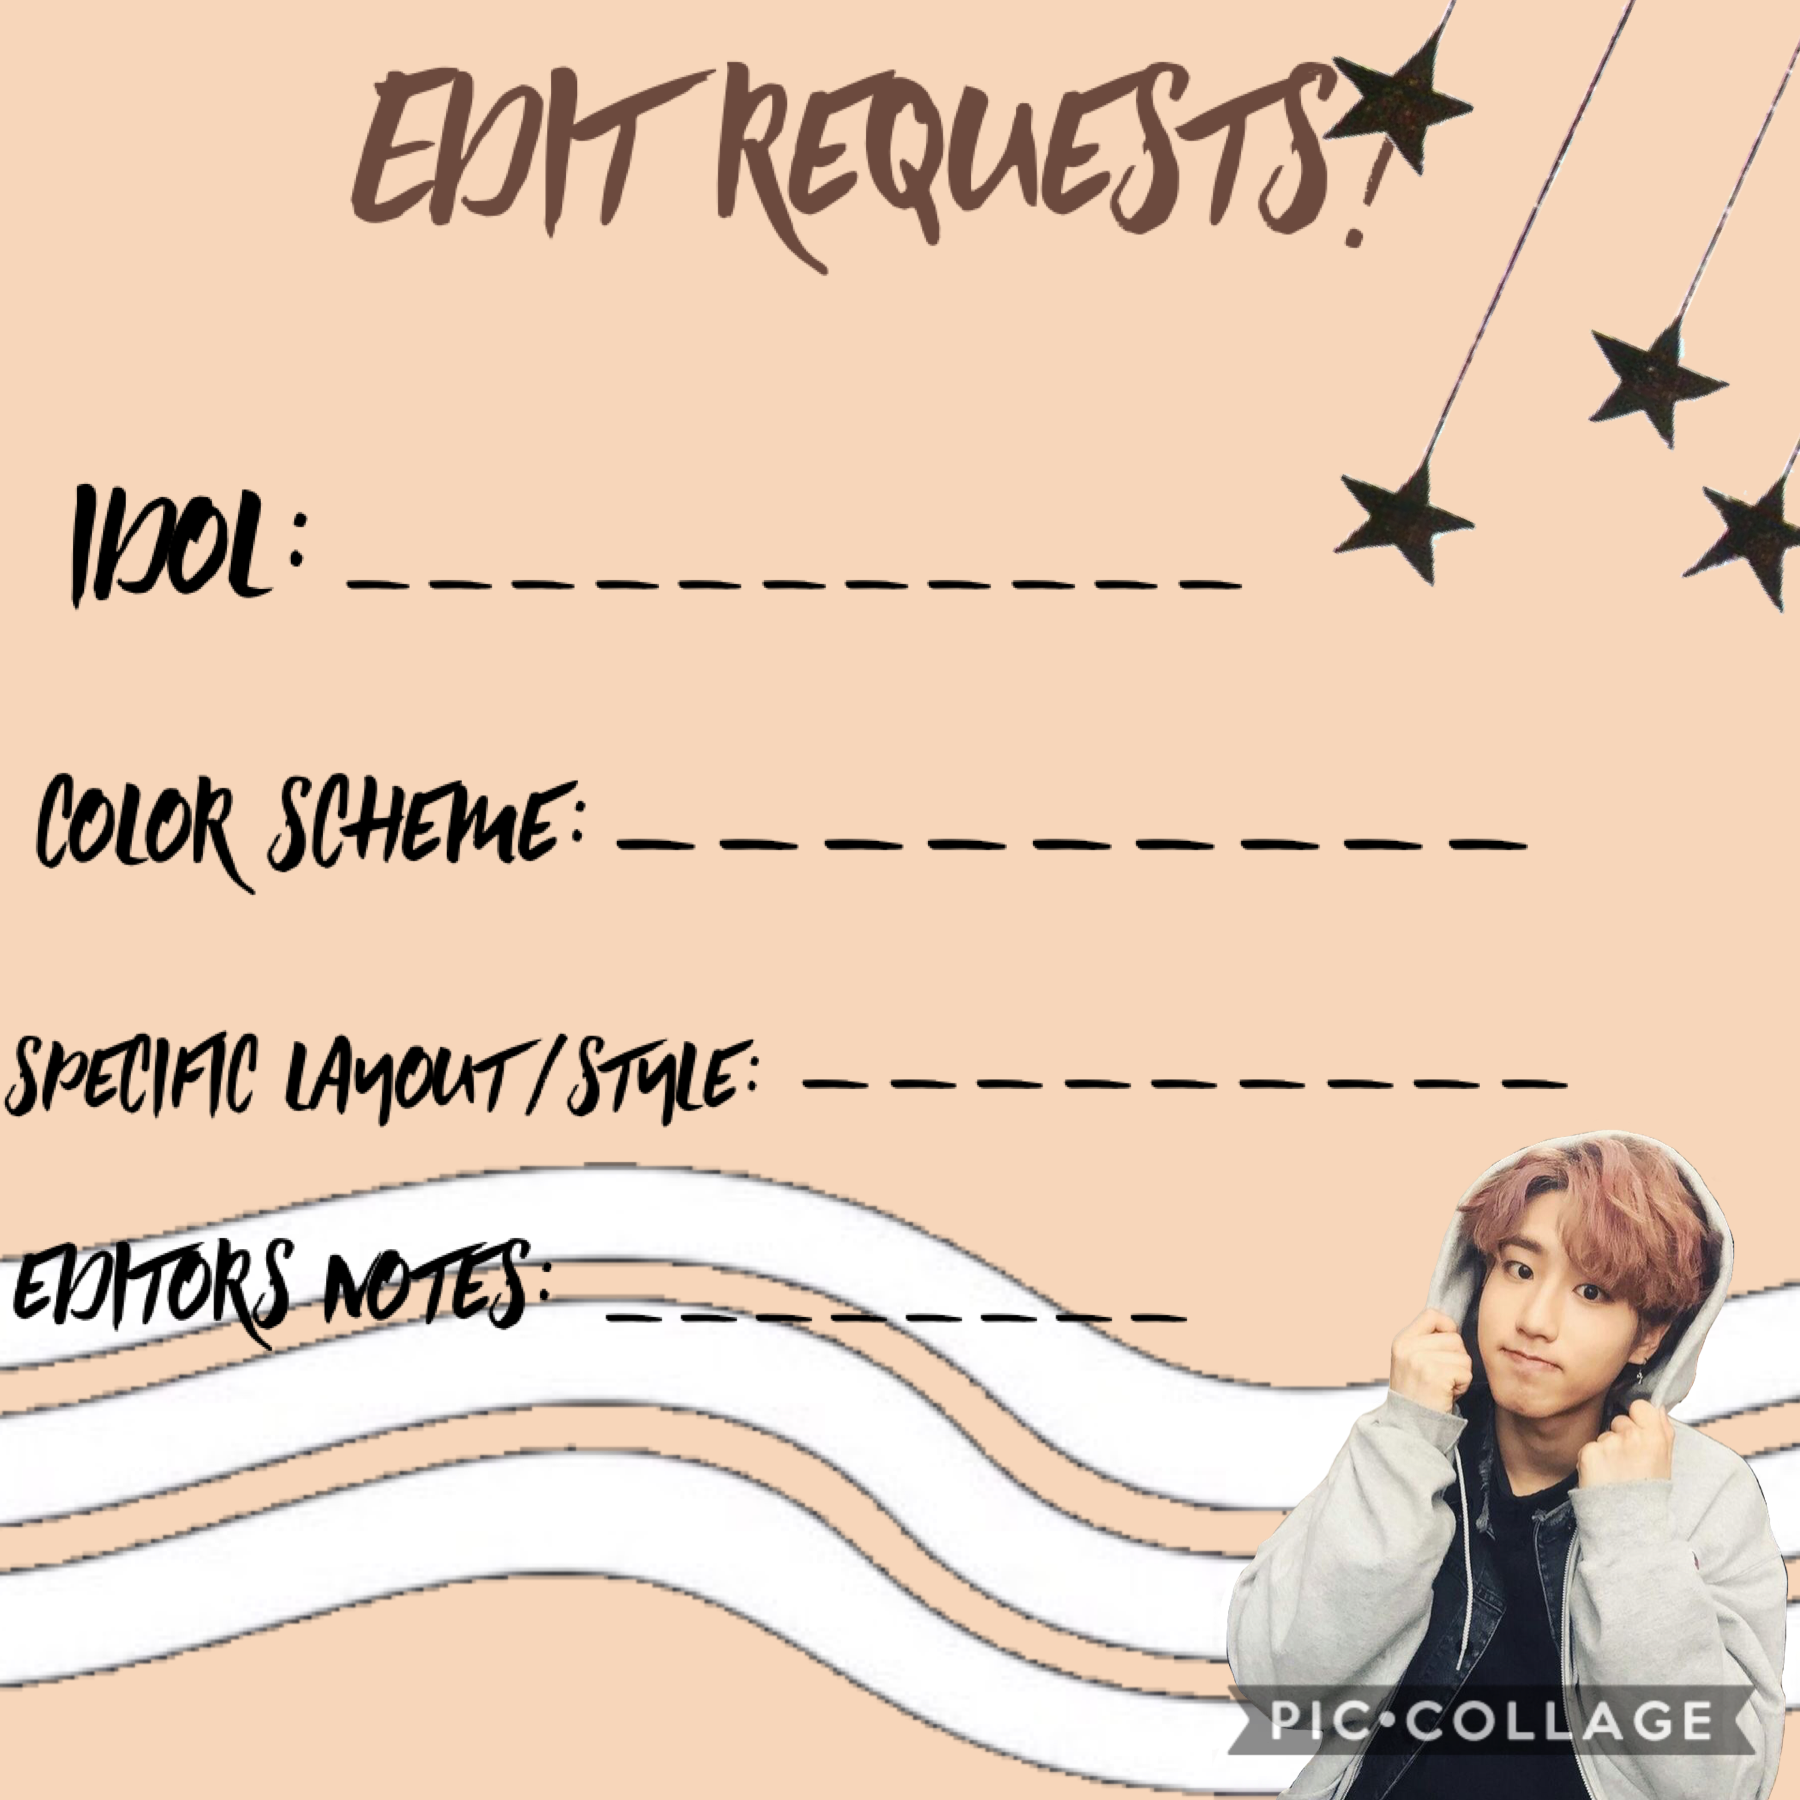 remix for edit requests!
i'll edit them prior to posting
and they will be releases probably two days after 
sending love,
-sarang-